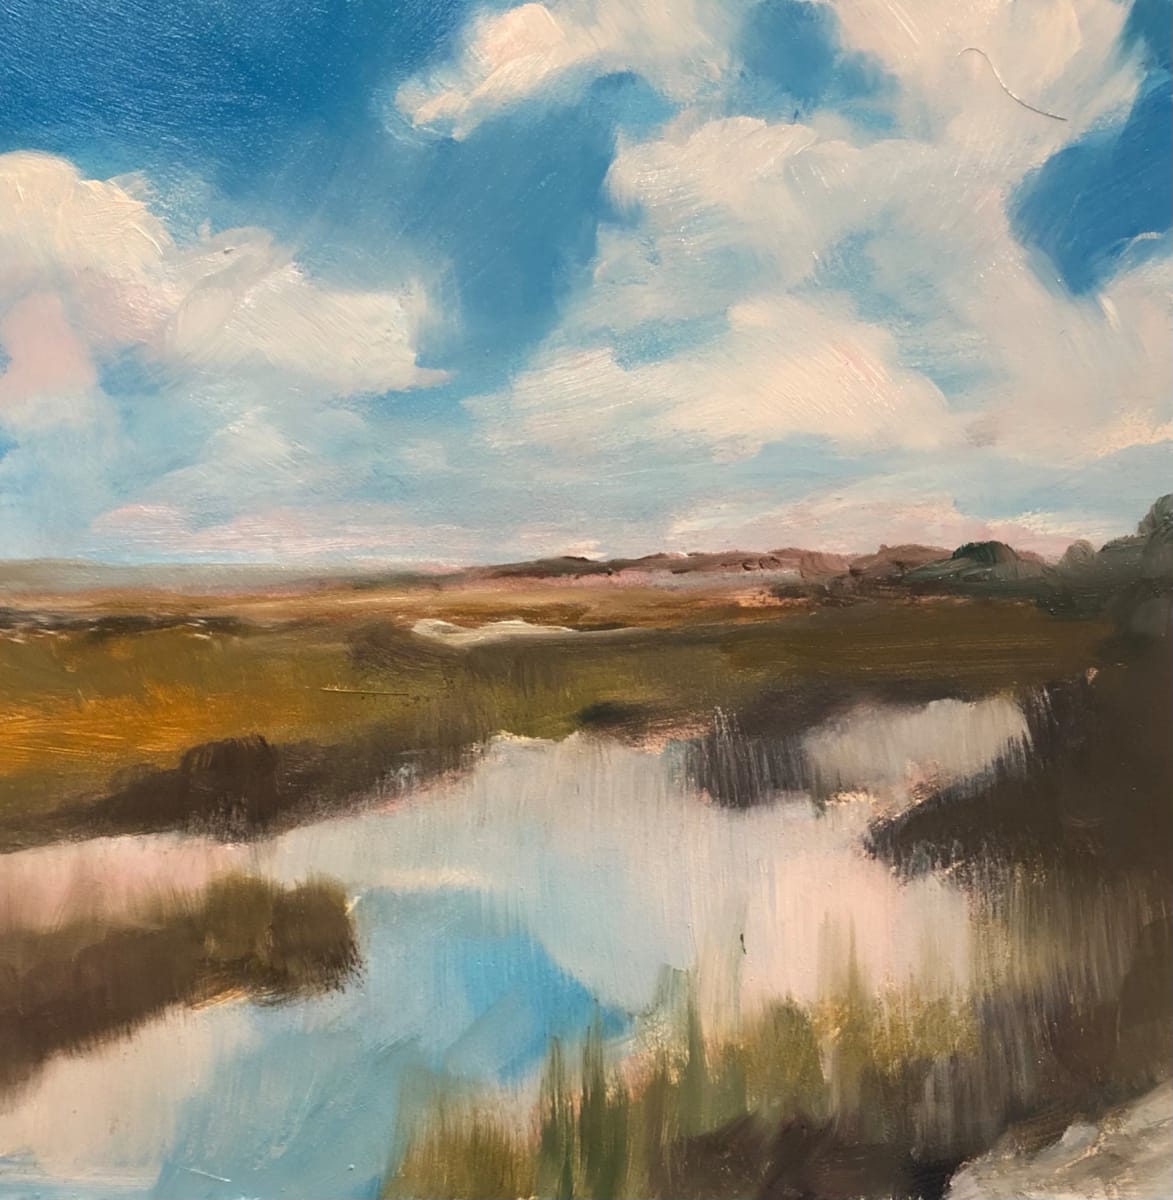 small scape-low country #12 by Rebecca Jacob  Image: Scape Sketch Collection-special places on my journey of life

scape sketch-low country #12

6x6 oil on ampersand museum gesso panel 2022

This painting was inspired by the views of the marshlands in the low country of South Carolina.